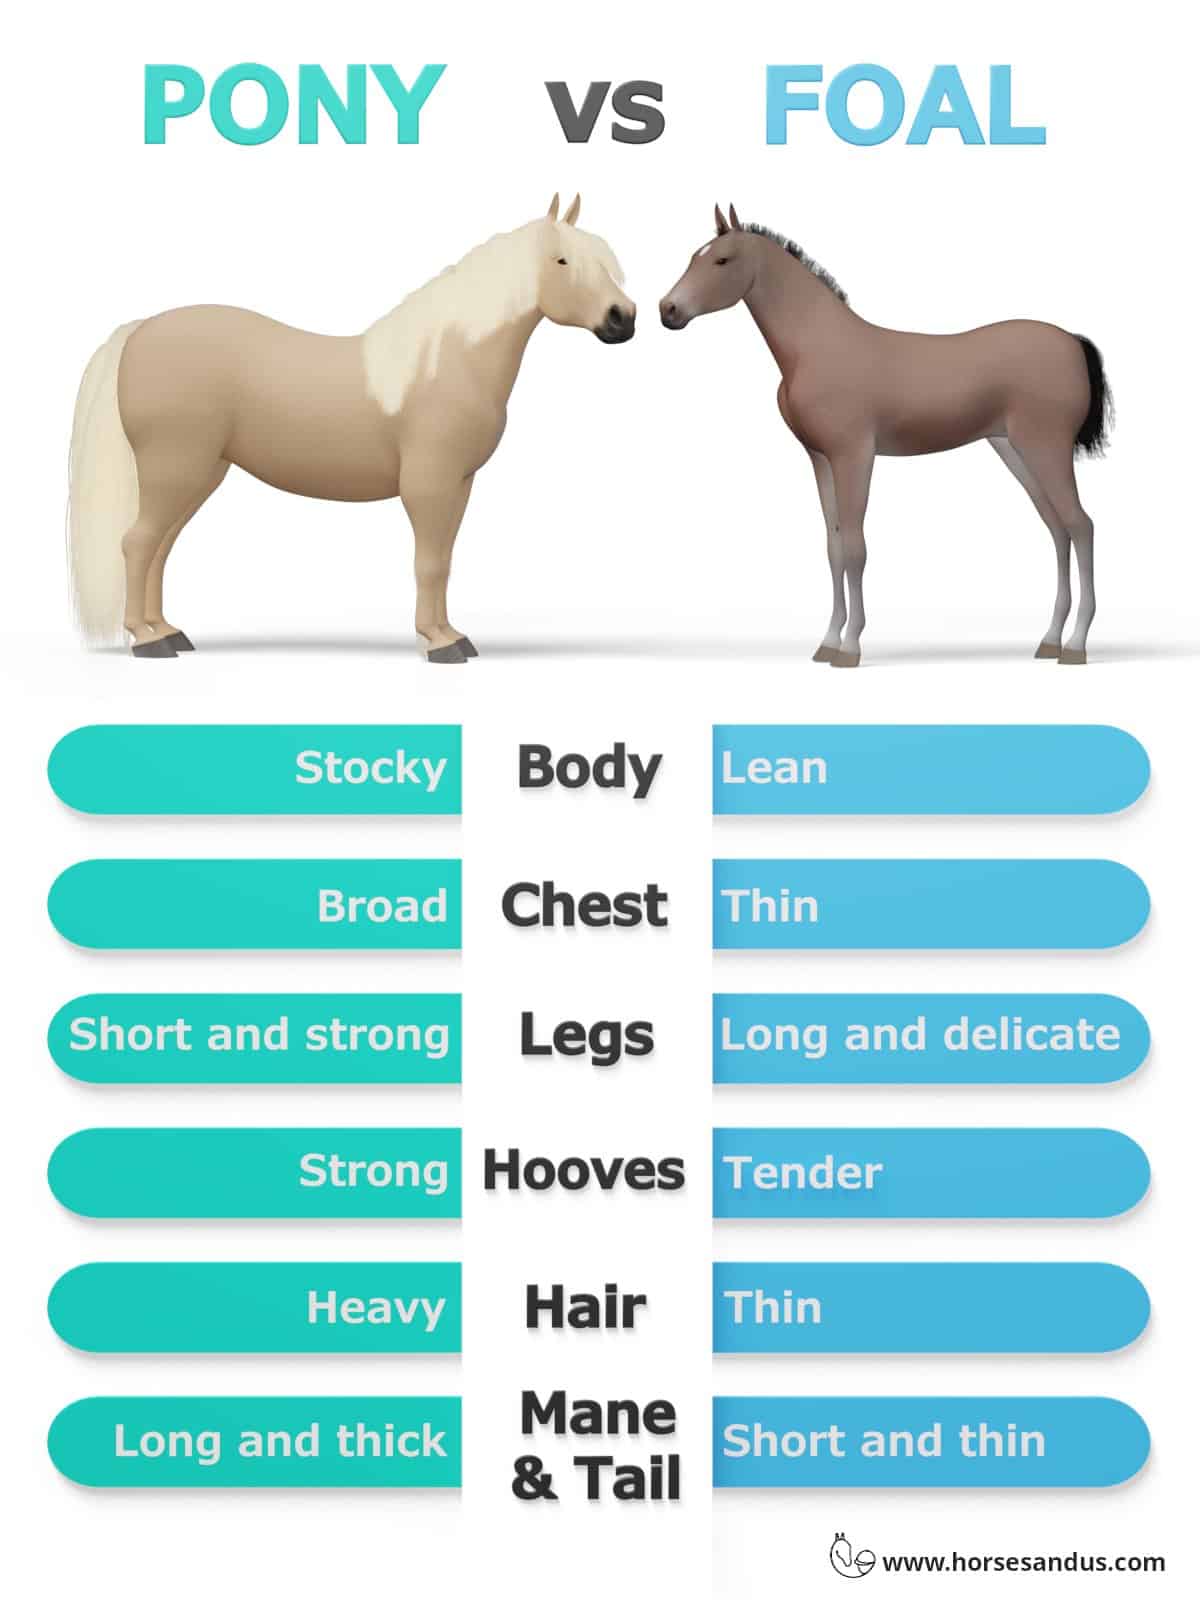 Is a pony a baby horse?